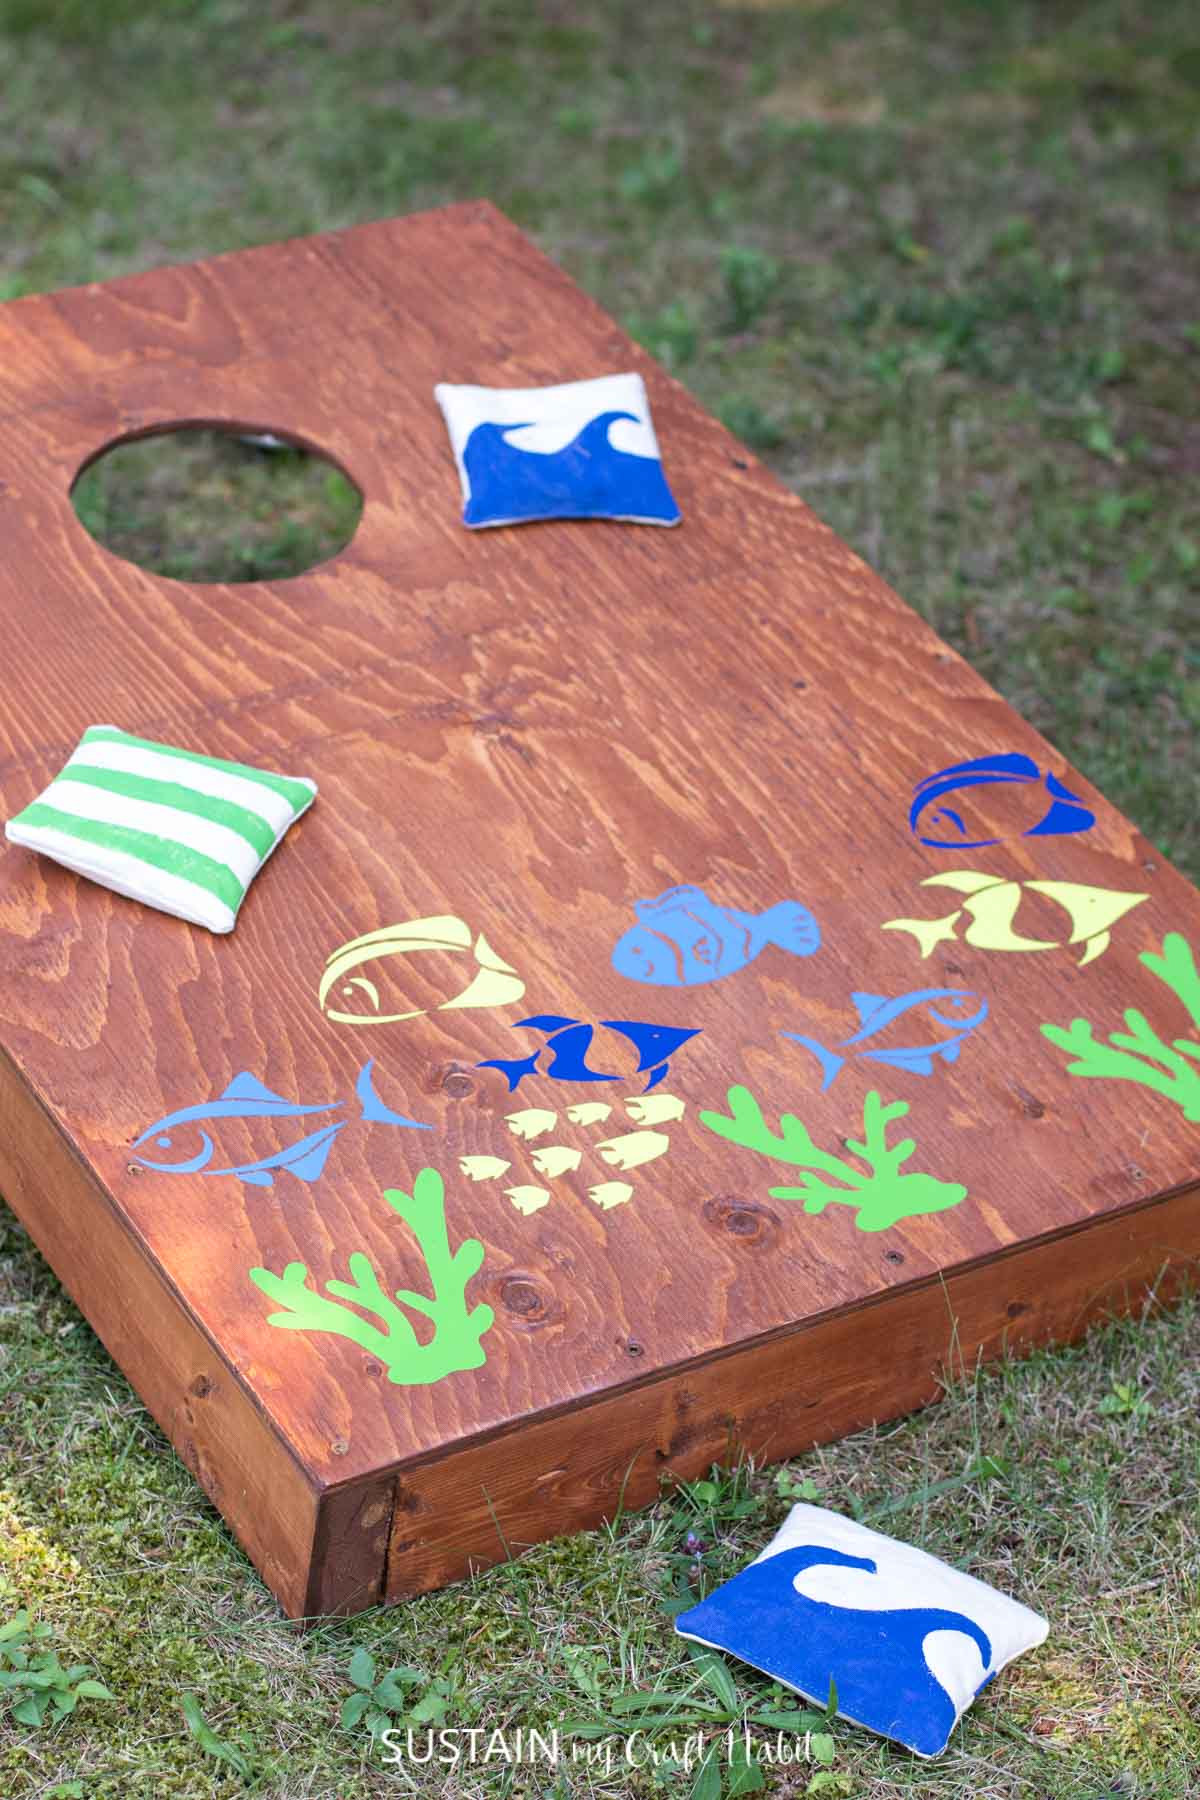 a completed cornhole game board embellished with fish decals